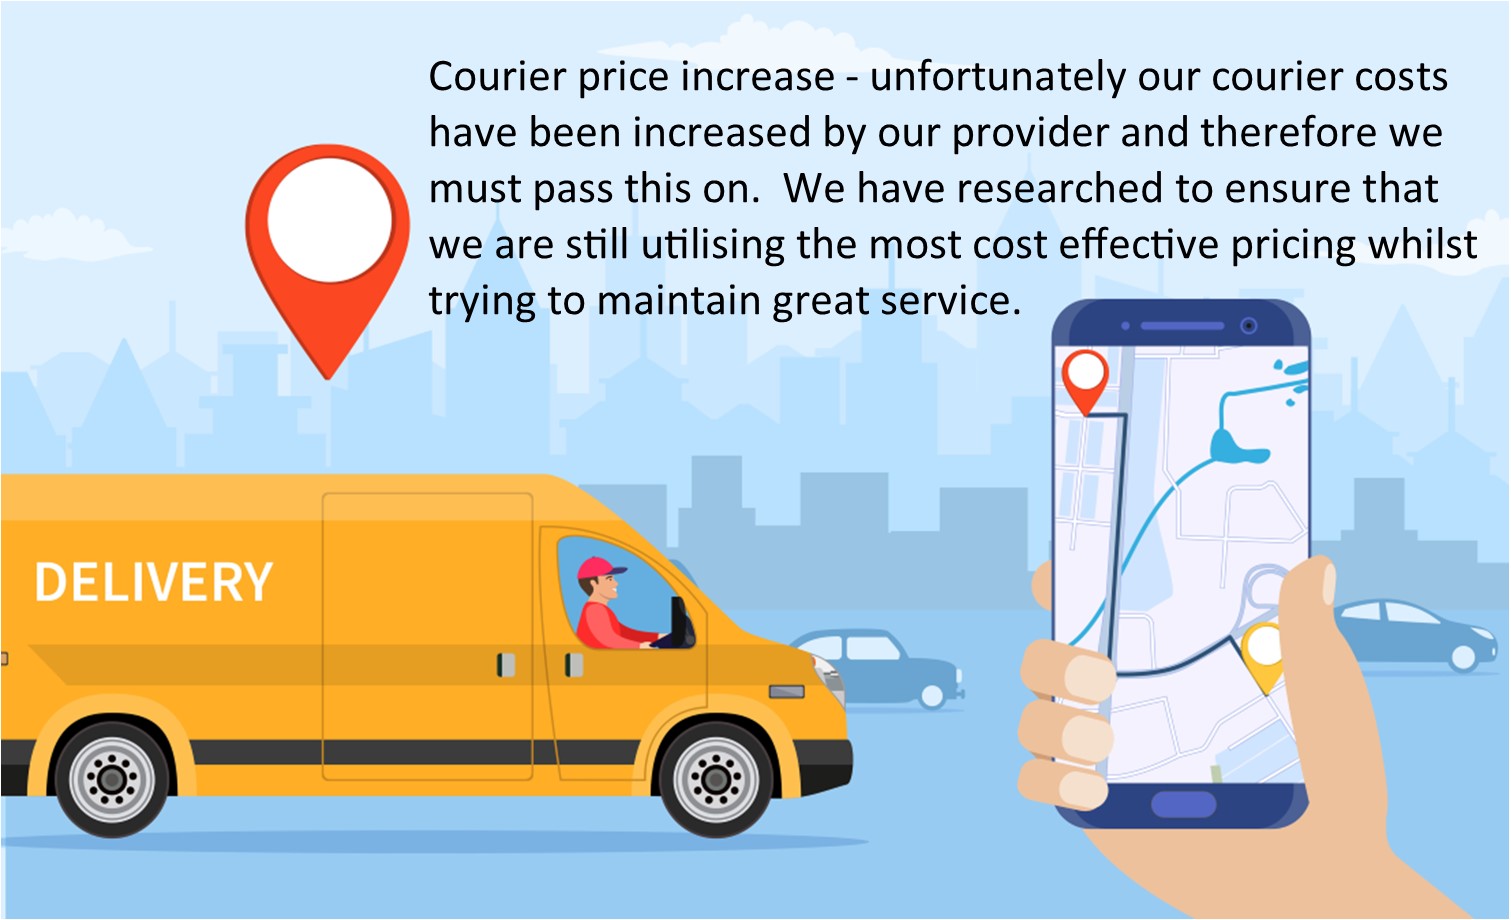 Courier costs